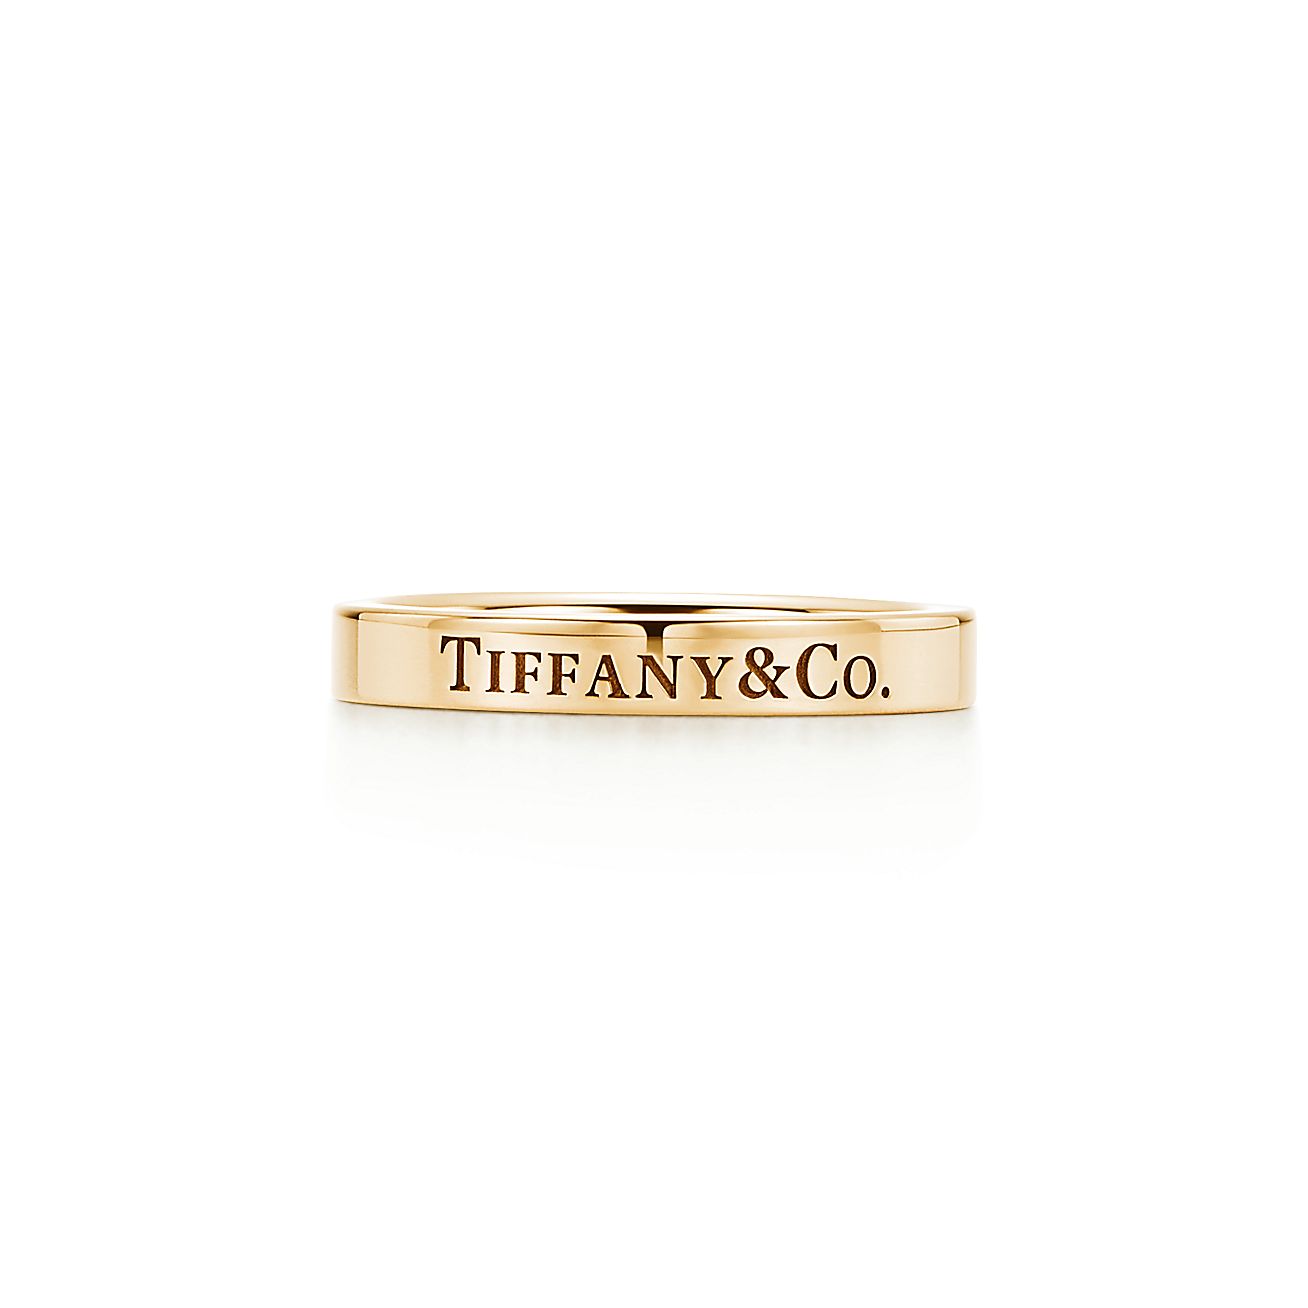 Tiffany & Co.® band ring in 18k gold, 3 mm. | Tiffany & Co.